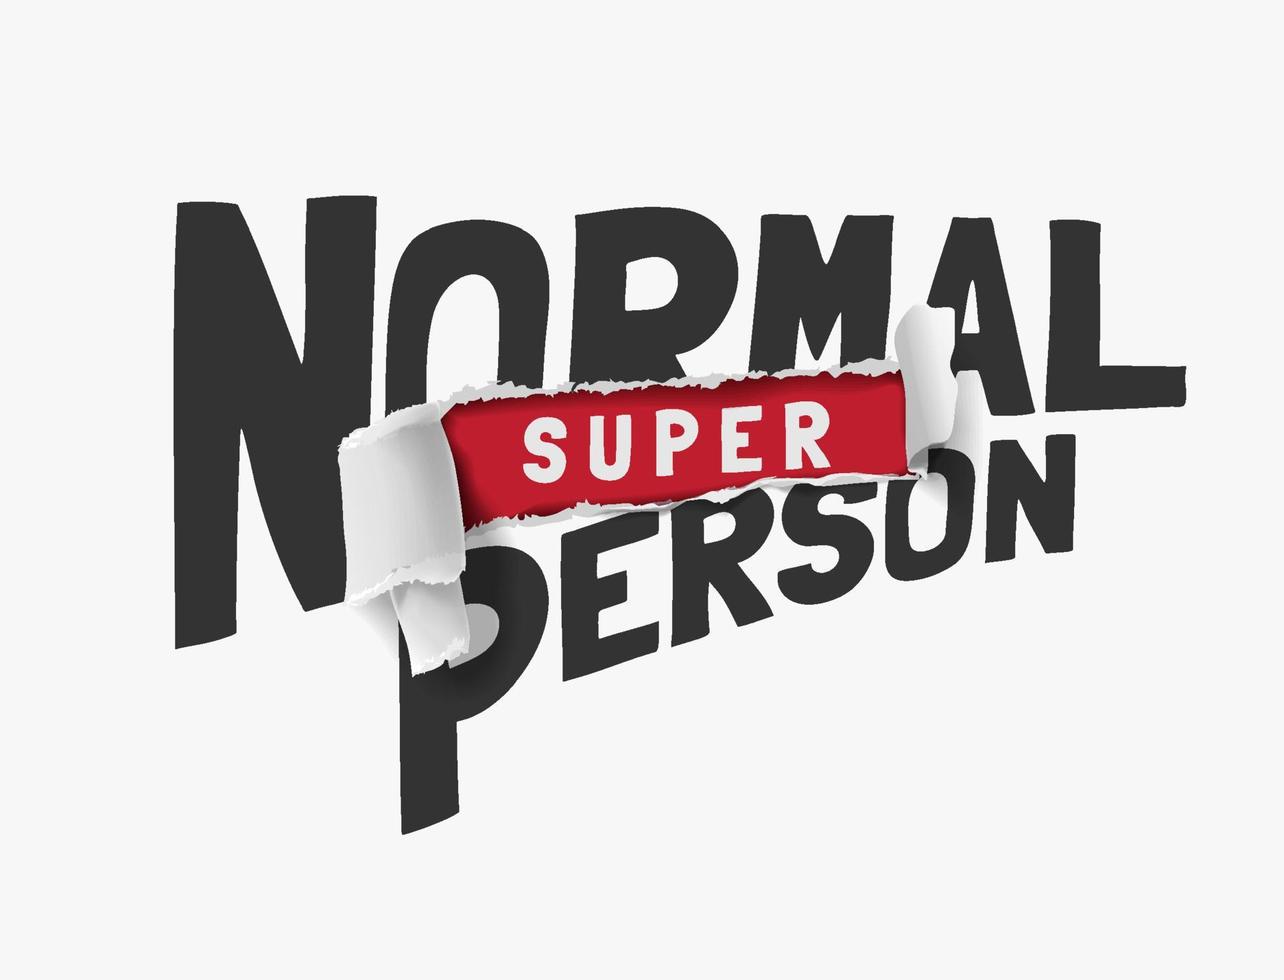 super normal person slogan on ripped paper vector illustration